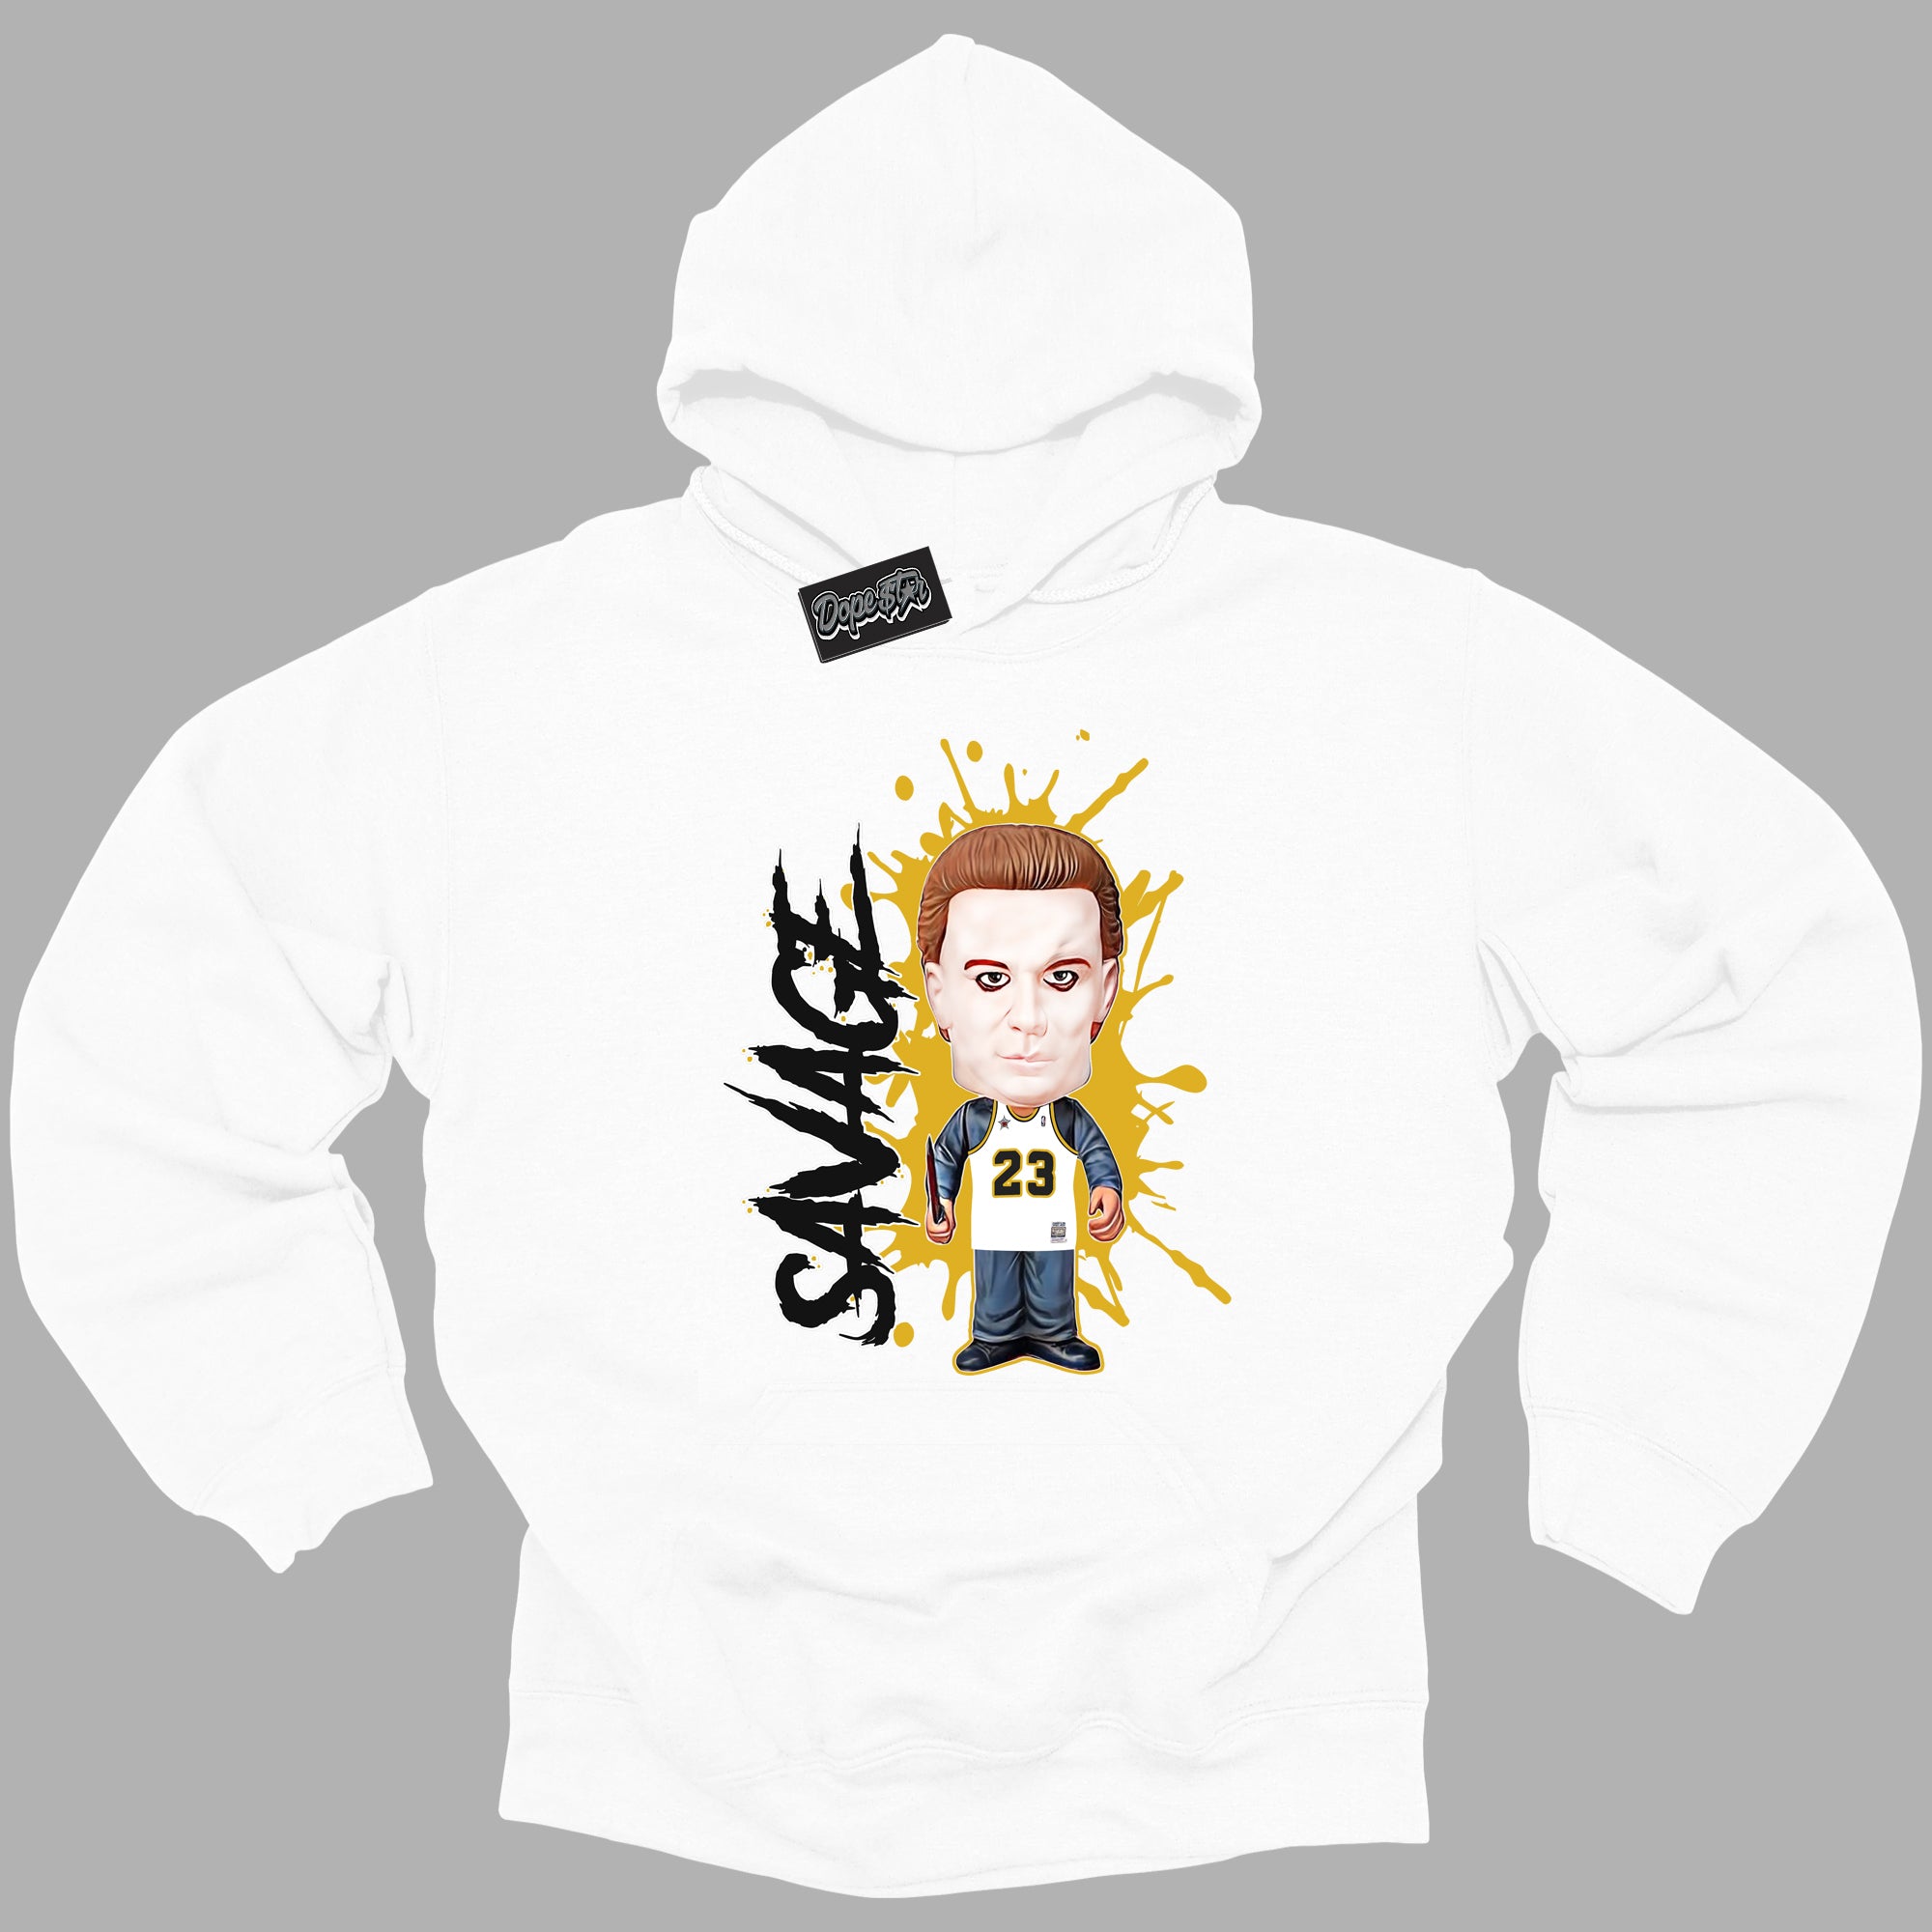 Cool White Hoodie with “ Michael Myers Savage ”  design that Perfectly Matches Yellow Ochre 6s Sneakers.